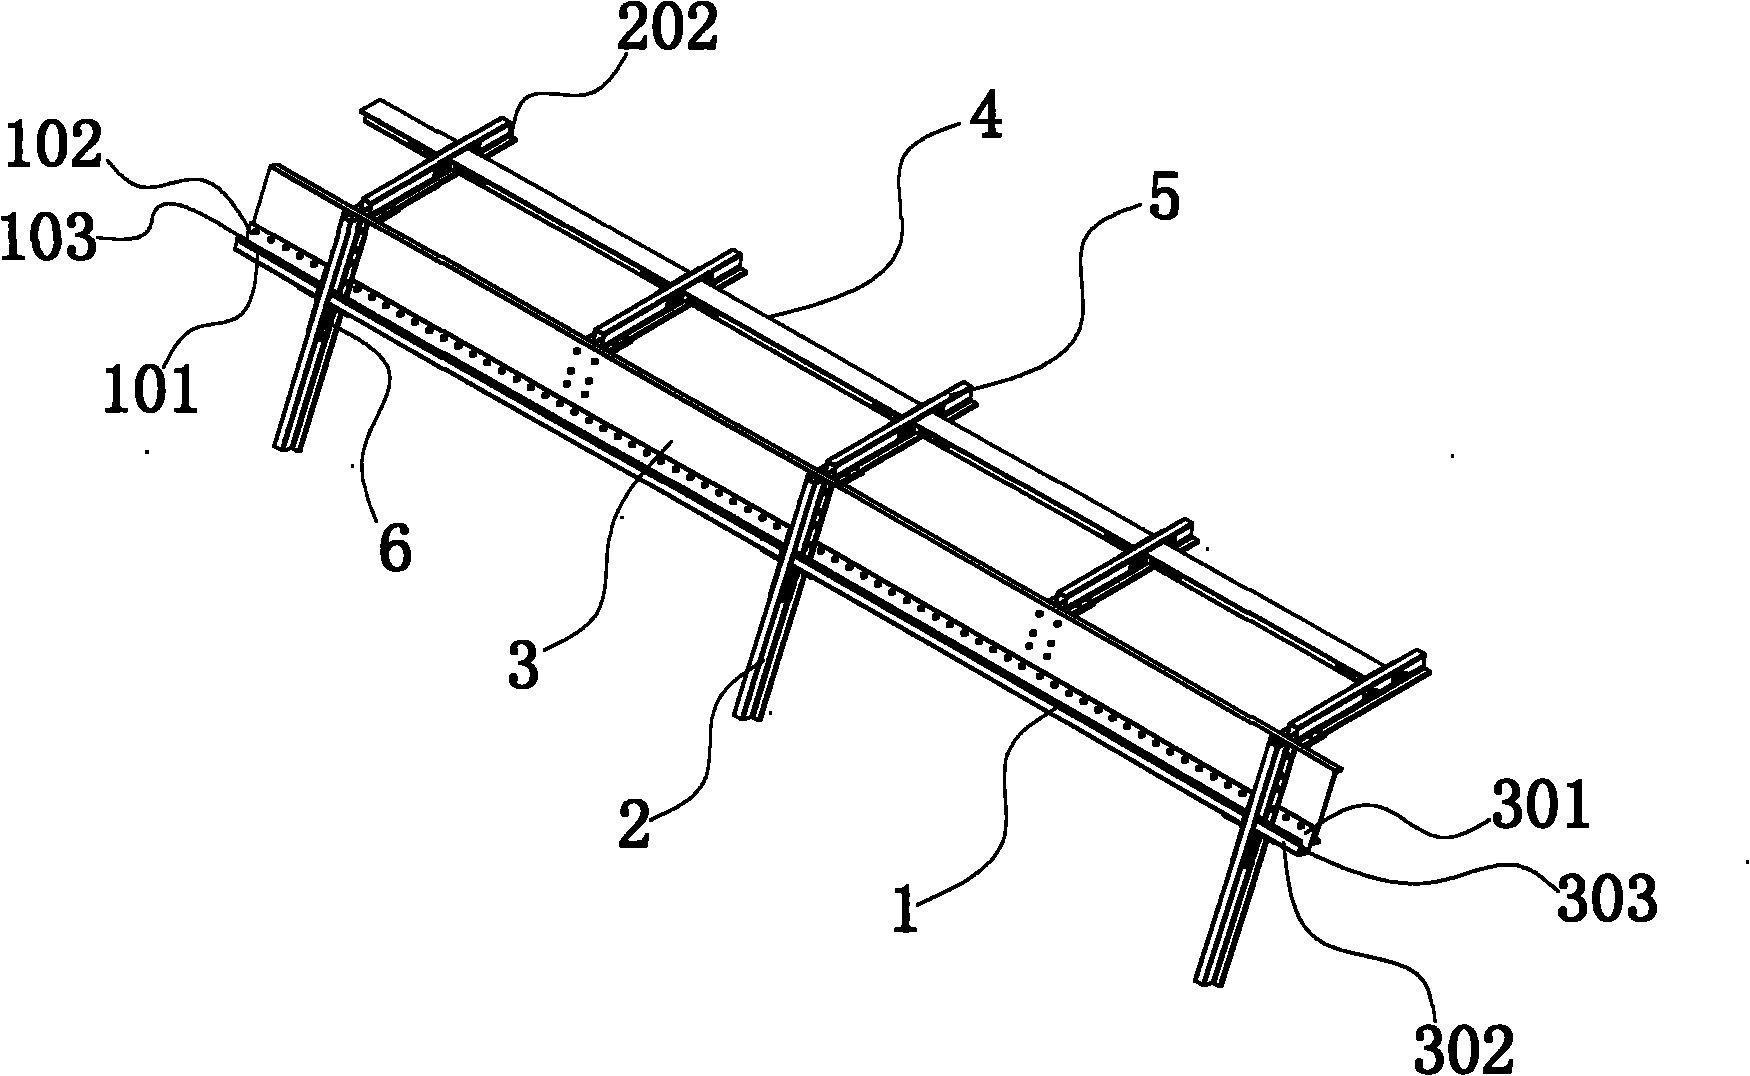 Car frame connecting structure